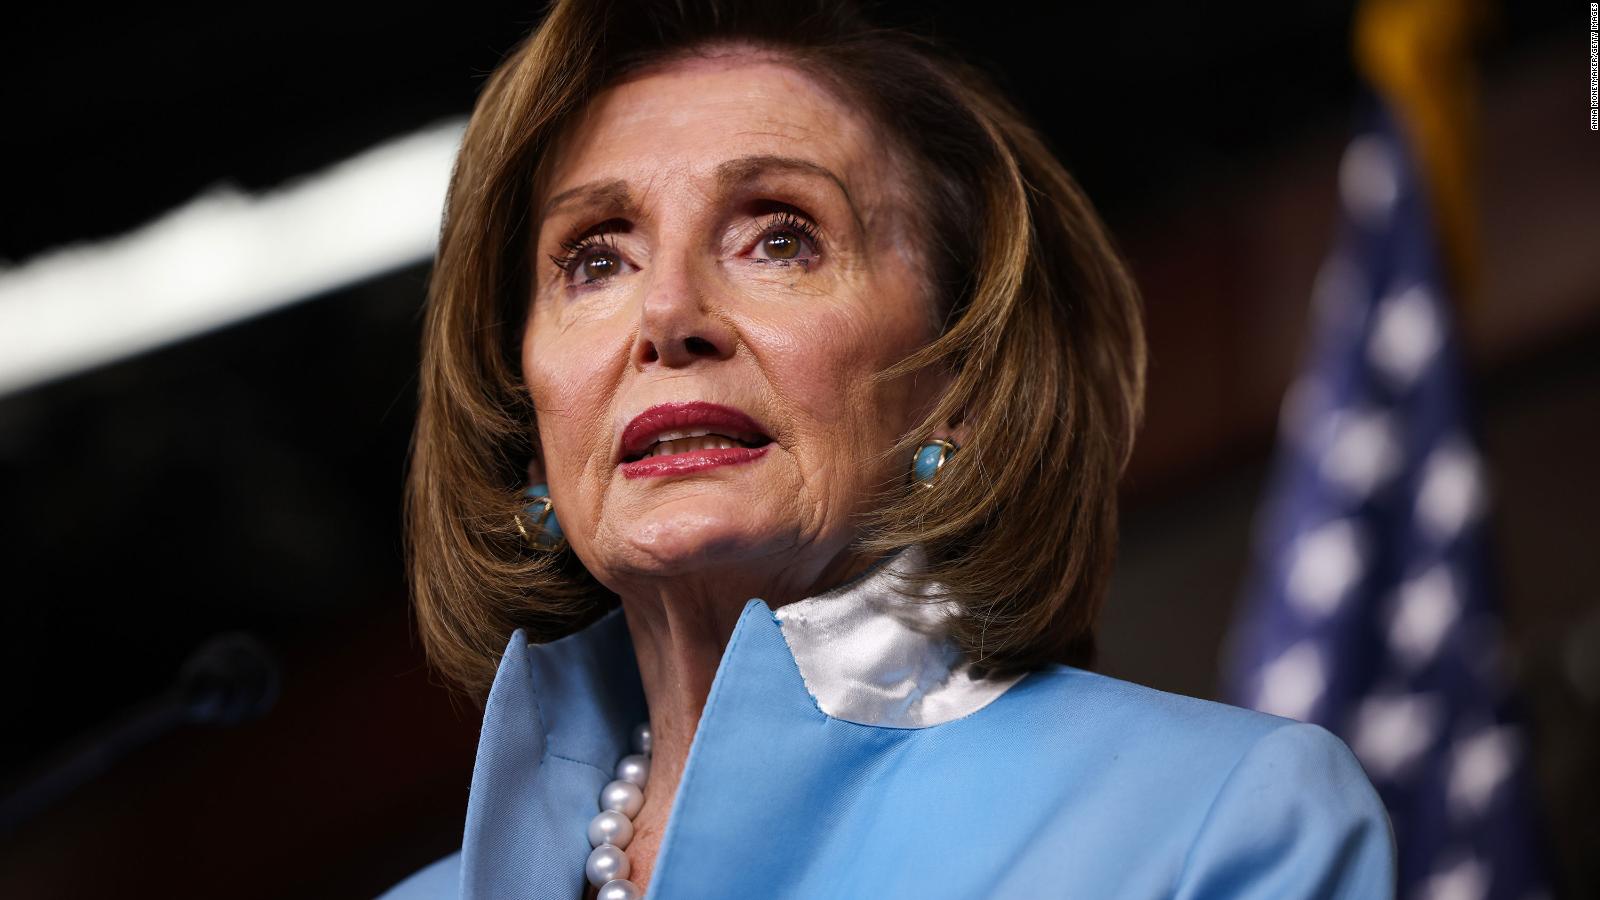 They confirmed that Nancy Pelosi will visit Taiwan and China issues a new warning